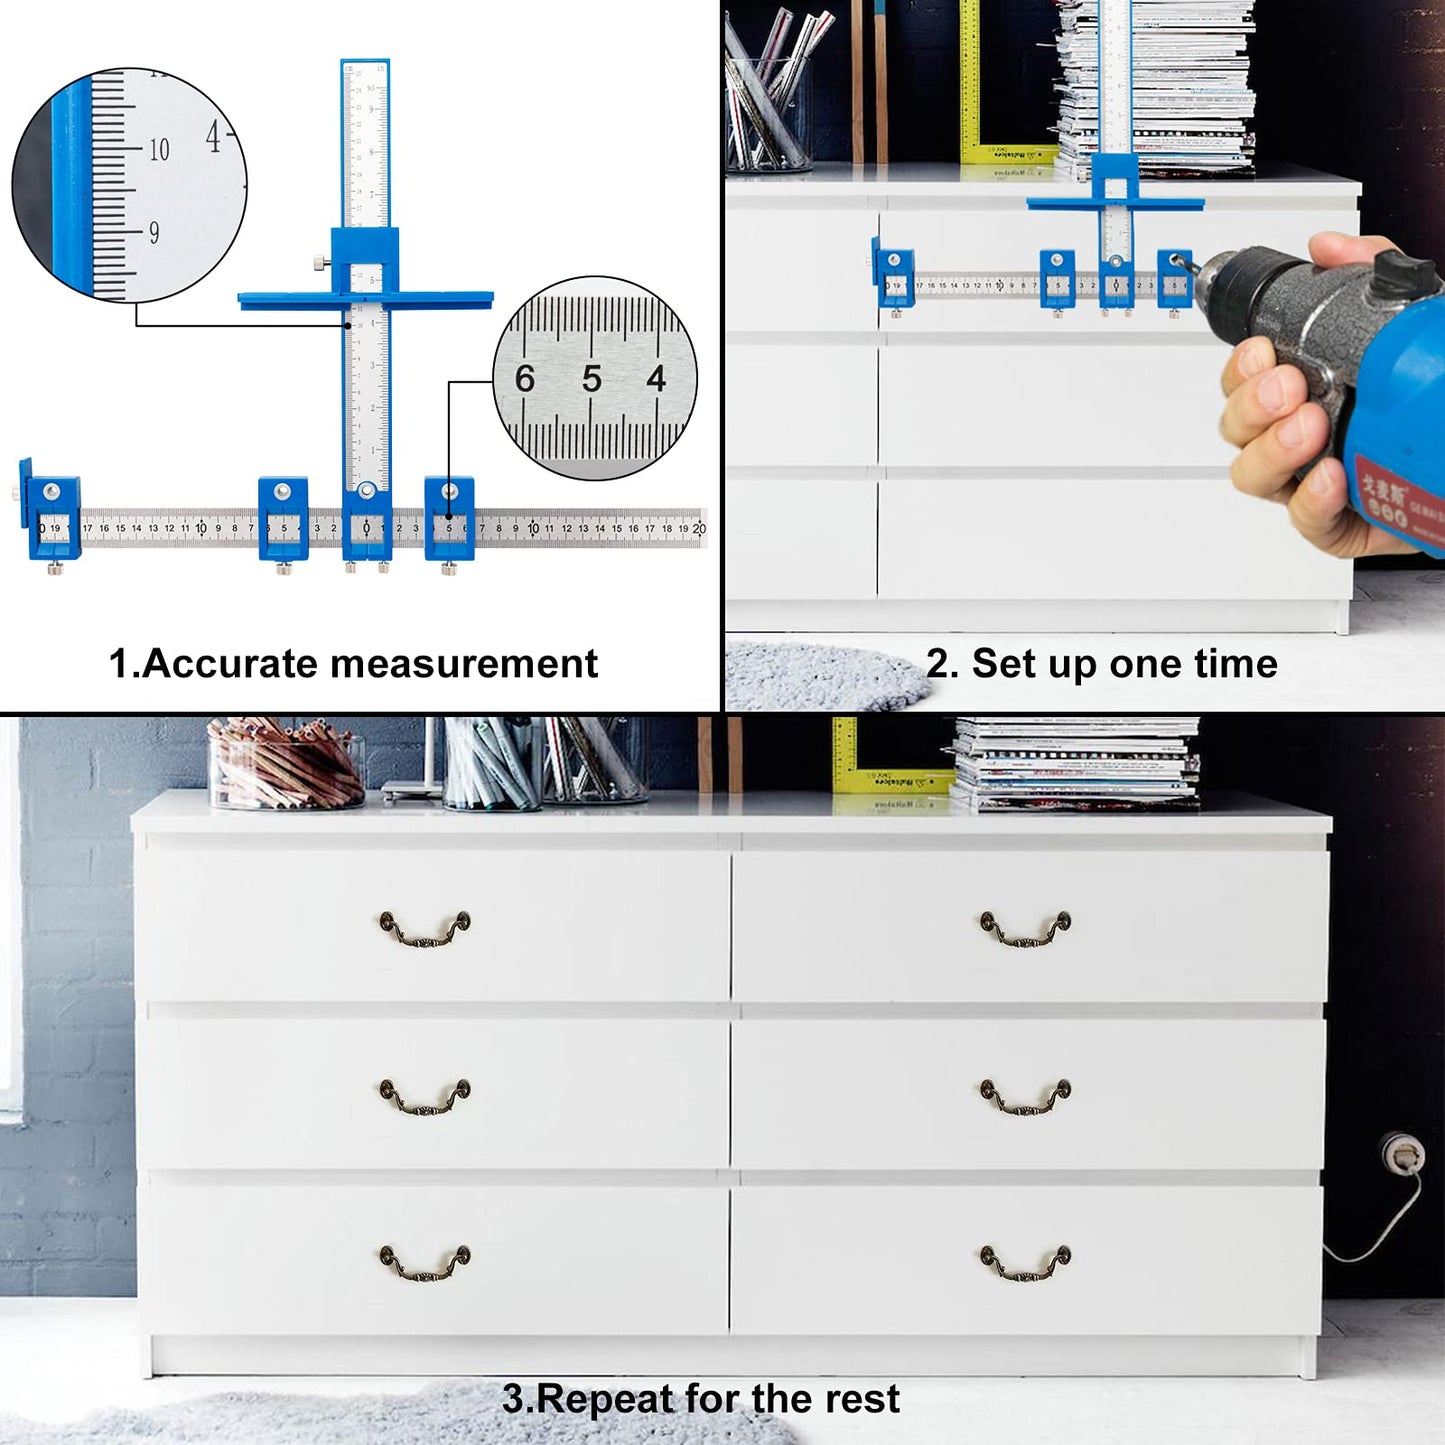 Cabinet Hardware Jig, Punch Locator Drill Guide,Wood Drilling Dowelling Guide for Installation of Handles Knobs on Doors and Drawer, Cabinet Template